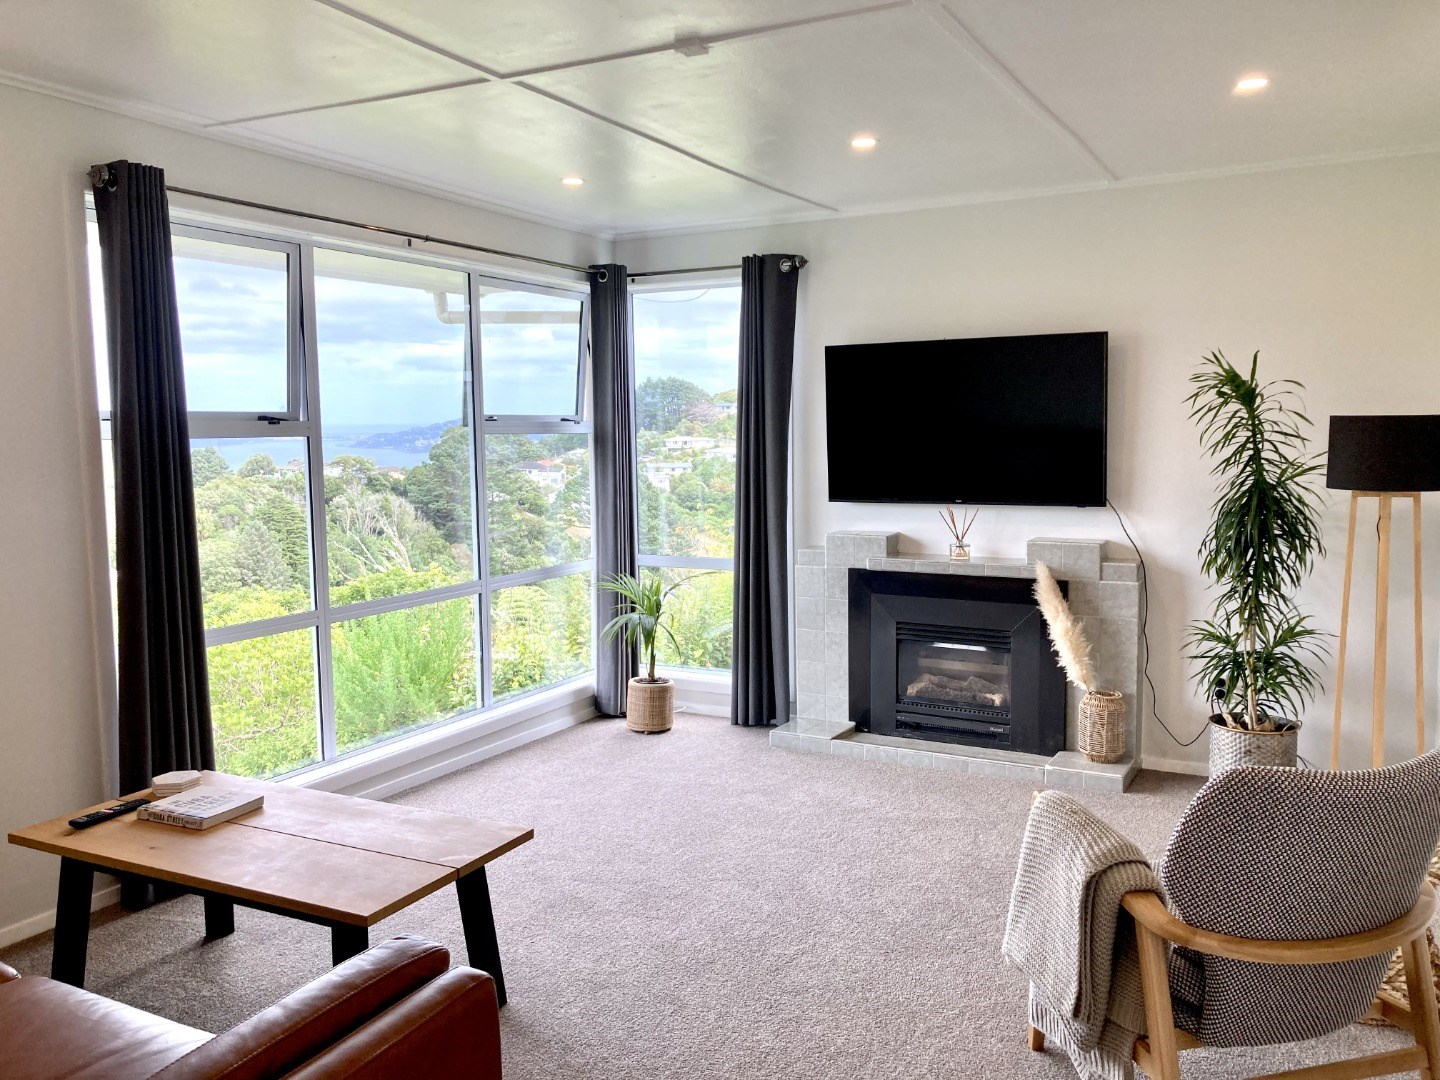 Real Estate For Rent Houses & Apartments : Renovated in Newlands, Wellington